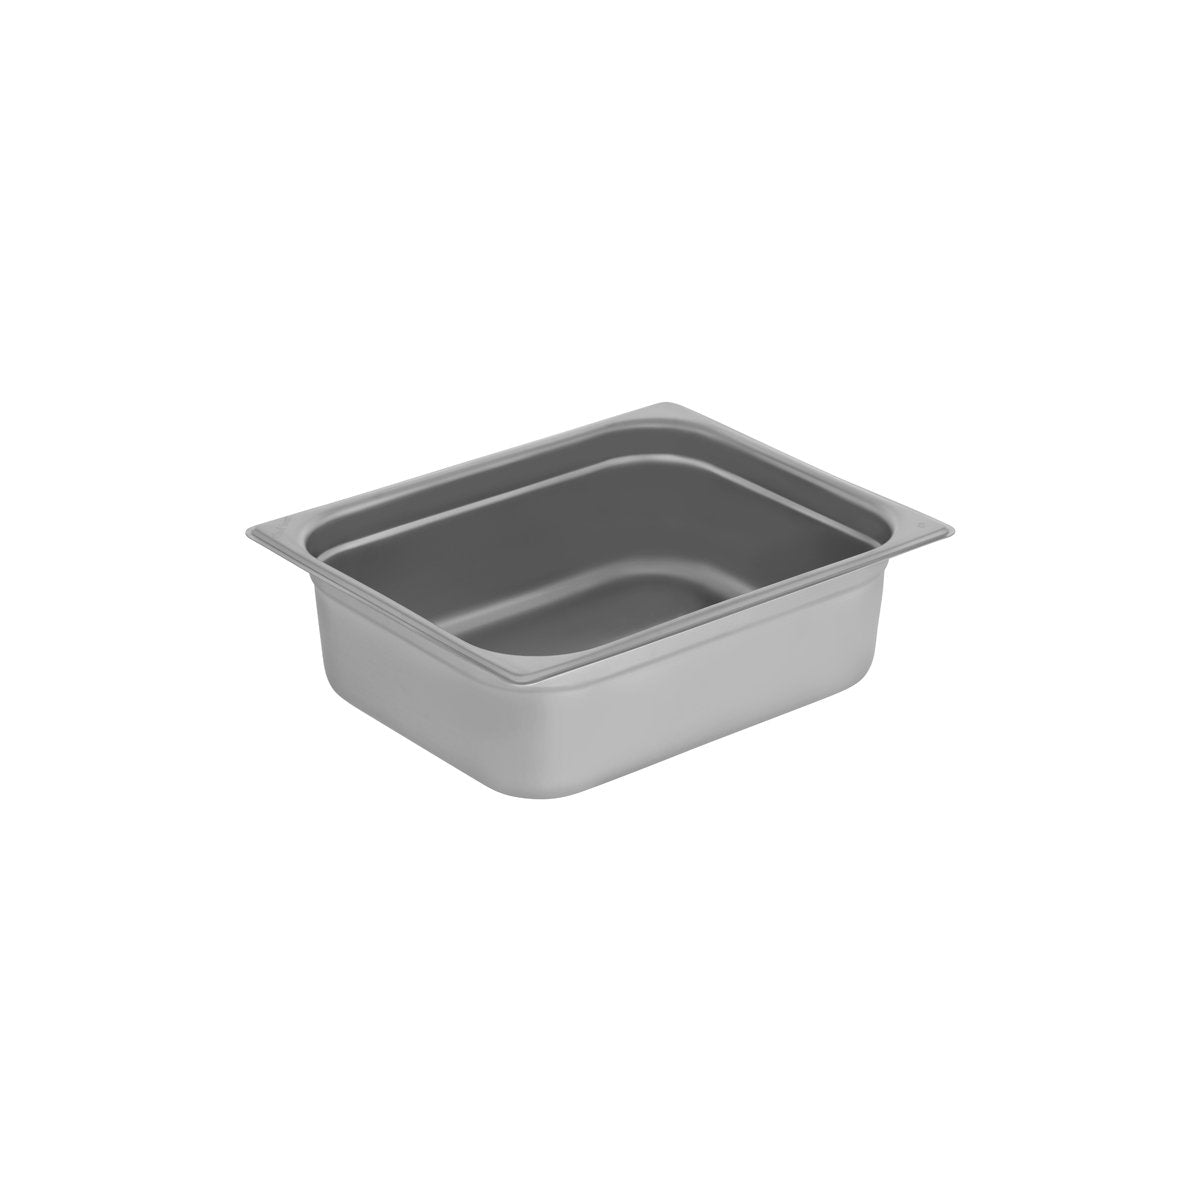 GN-12100 Chef Inox Gastronorm Pan 1/2 Size 100mm Tomkin Australia Hospitality Supplies